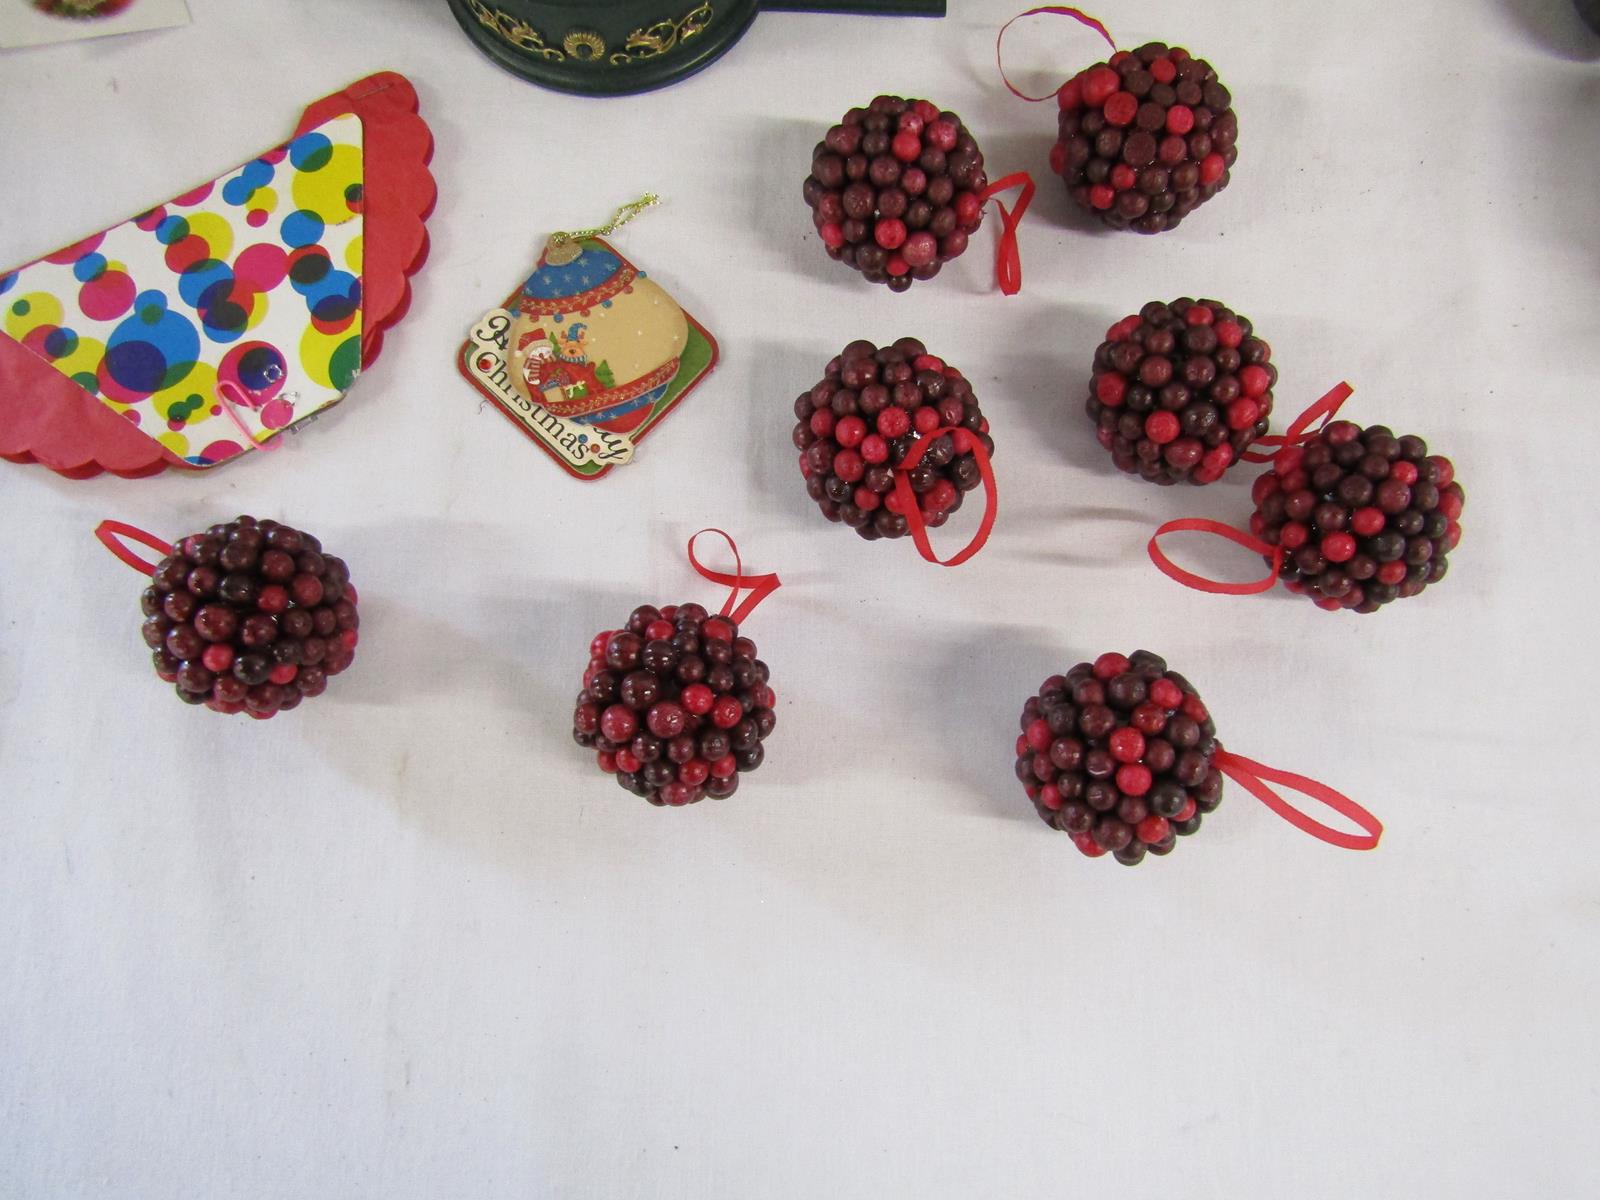 Christmas decorations includes glass baubles, decorative rocking horses, vintage wall hangers, - Image 7 of 7